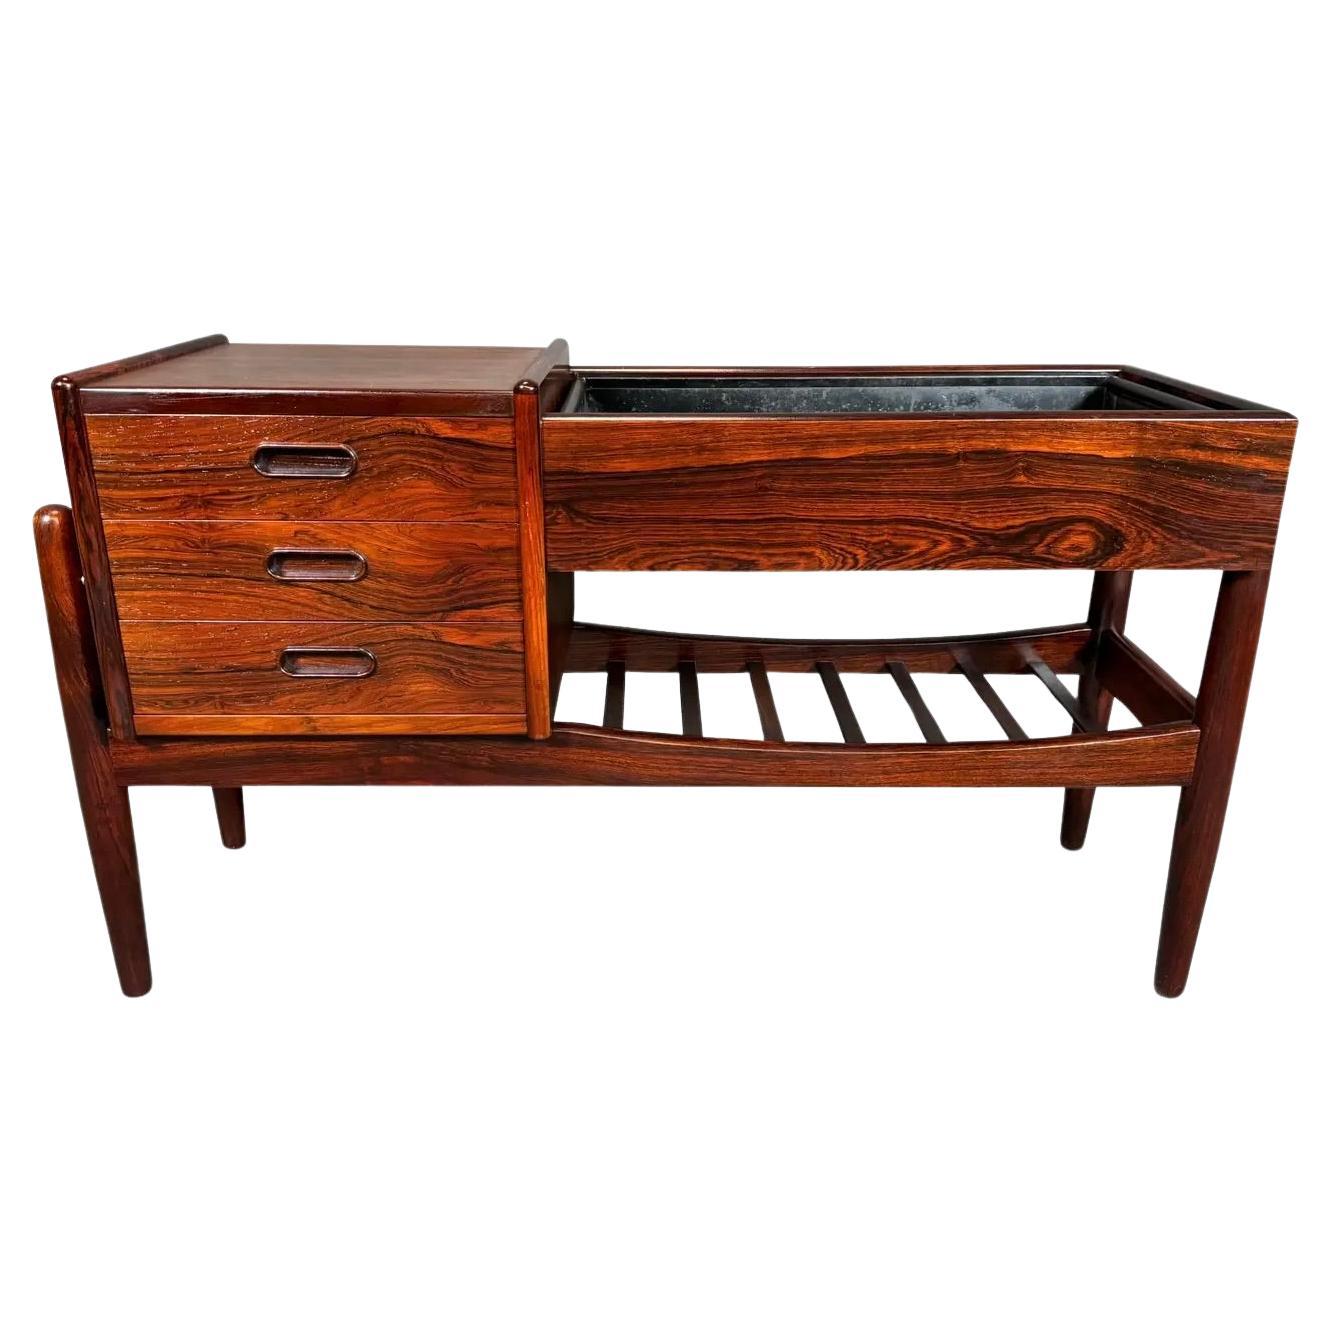 Vintage Danish Mid Century Modern Rosewood Entry Chest Planter by Arne Wahl Iver